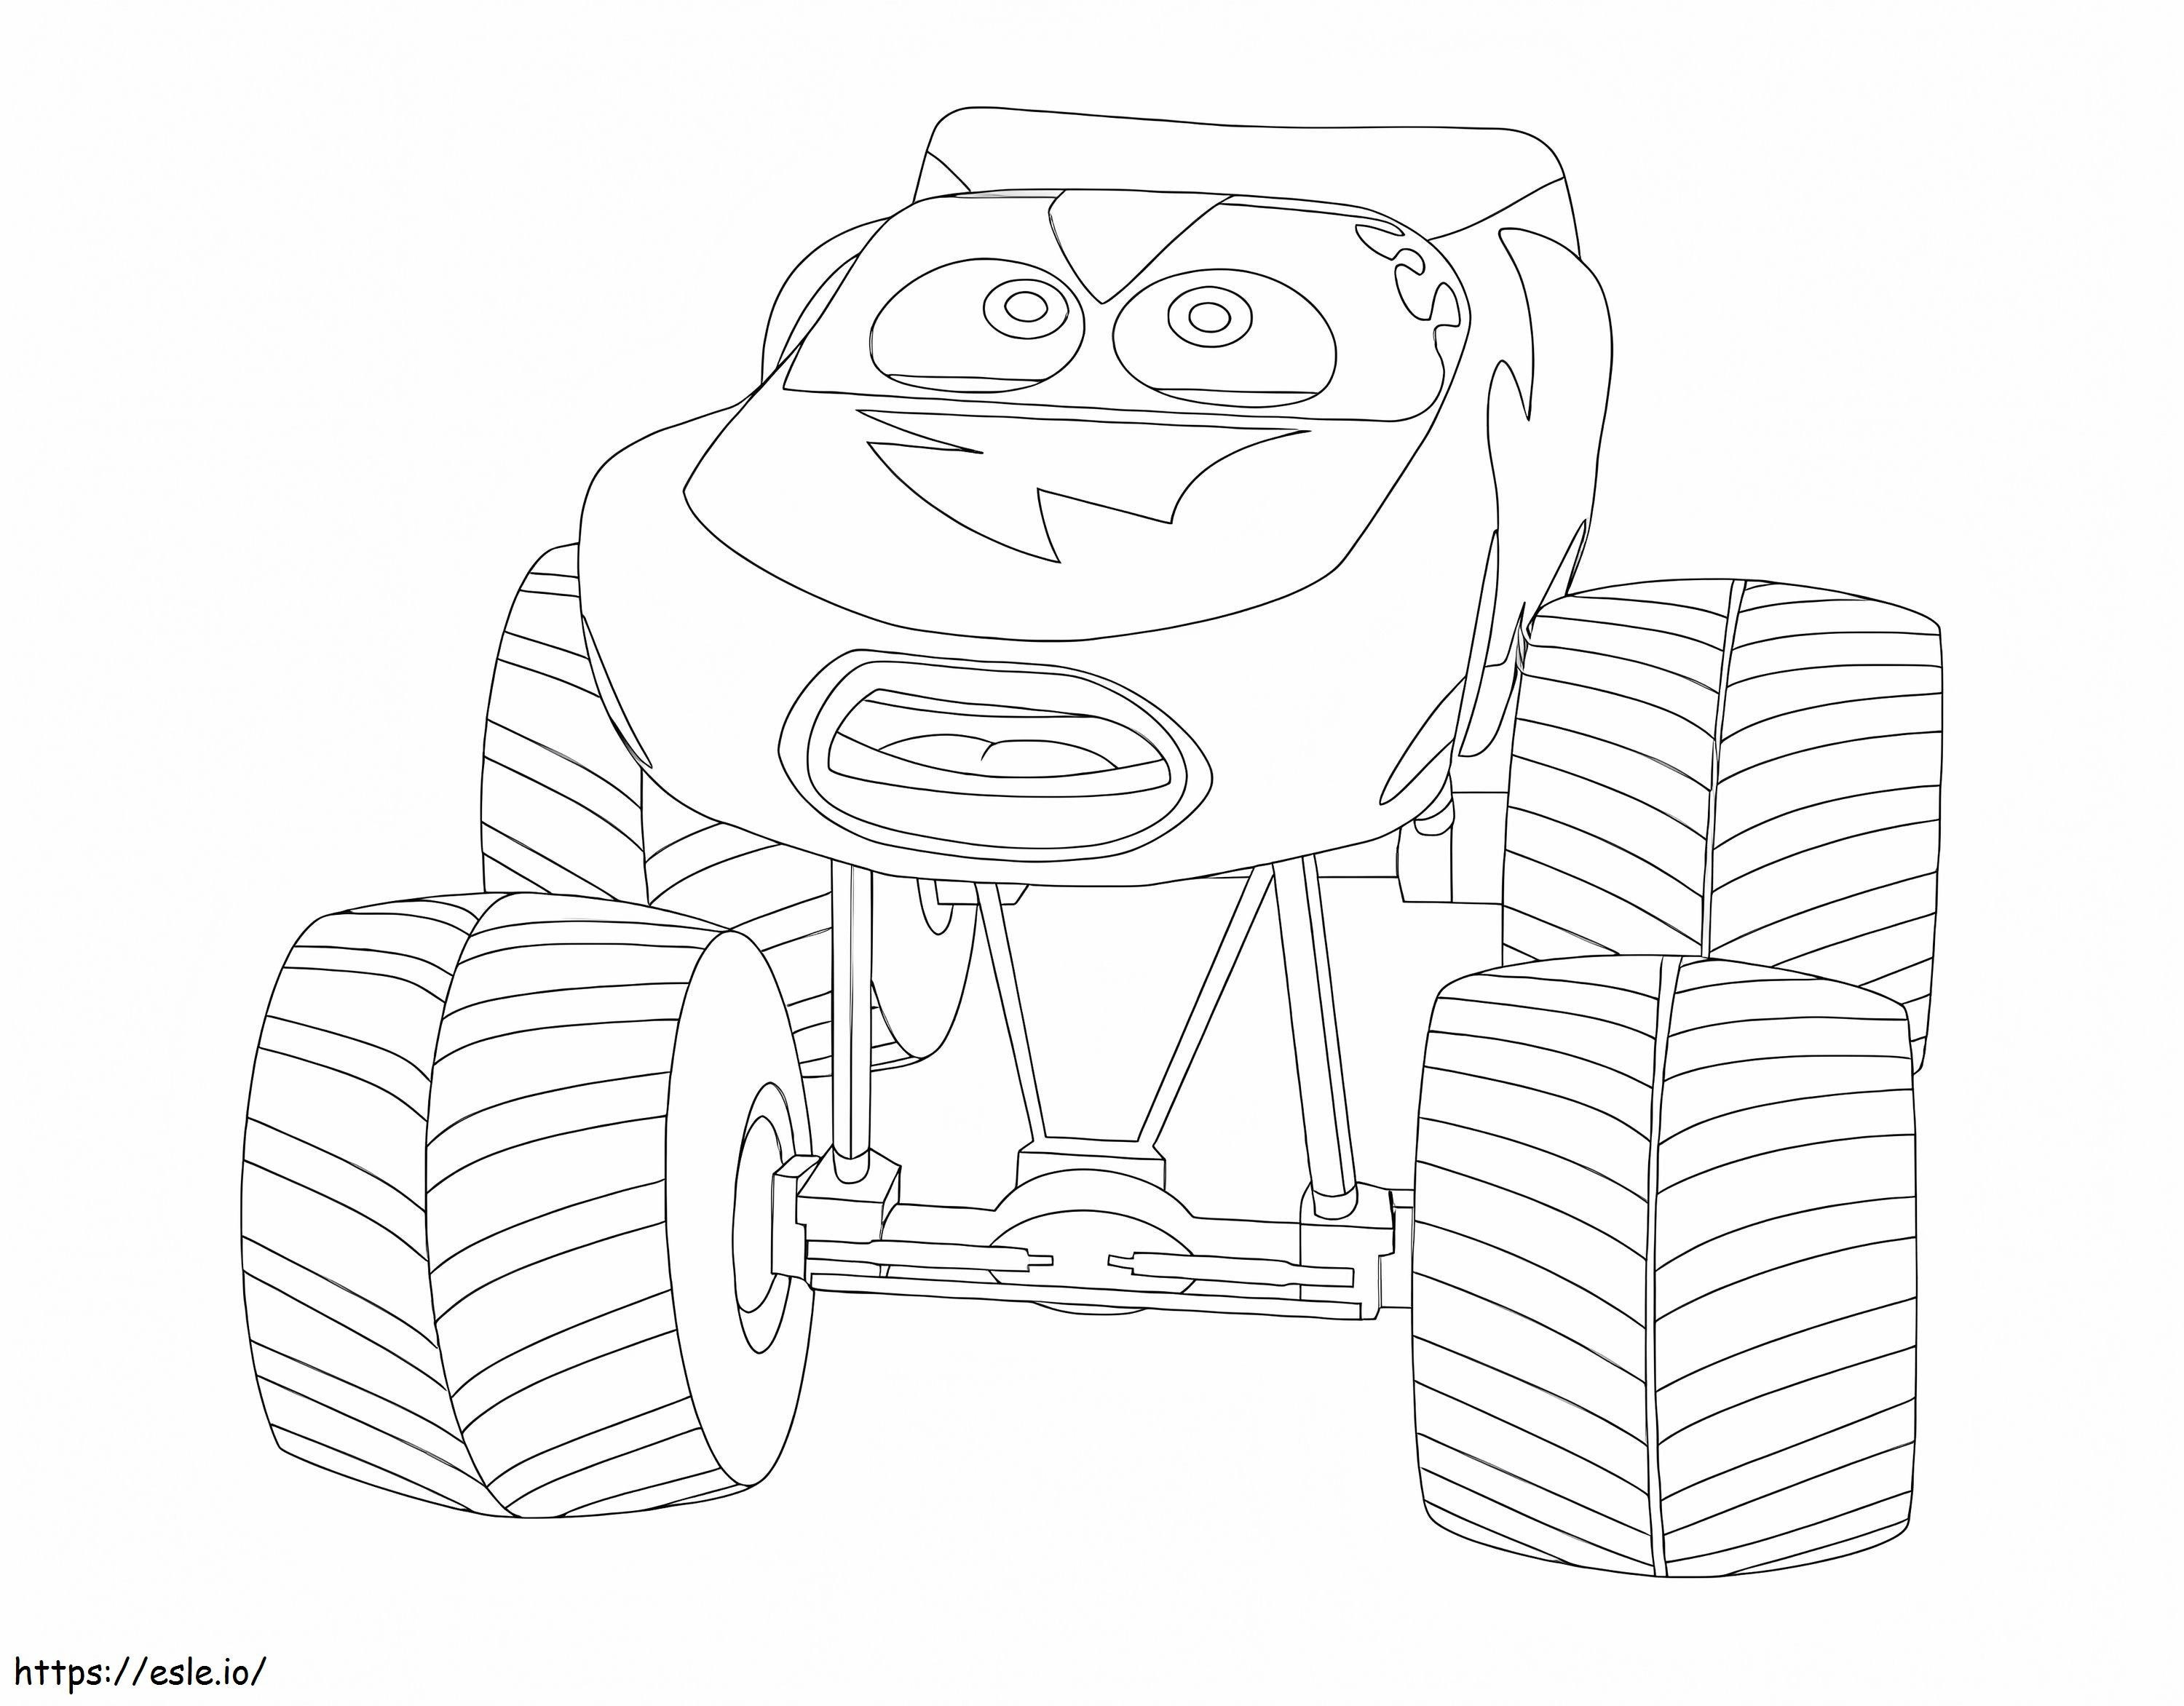 Mcqueen coloring page